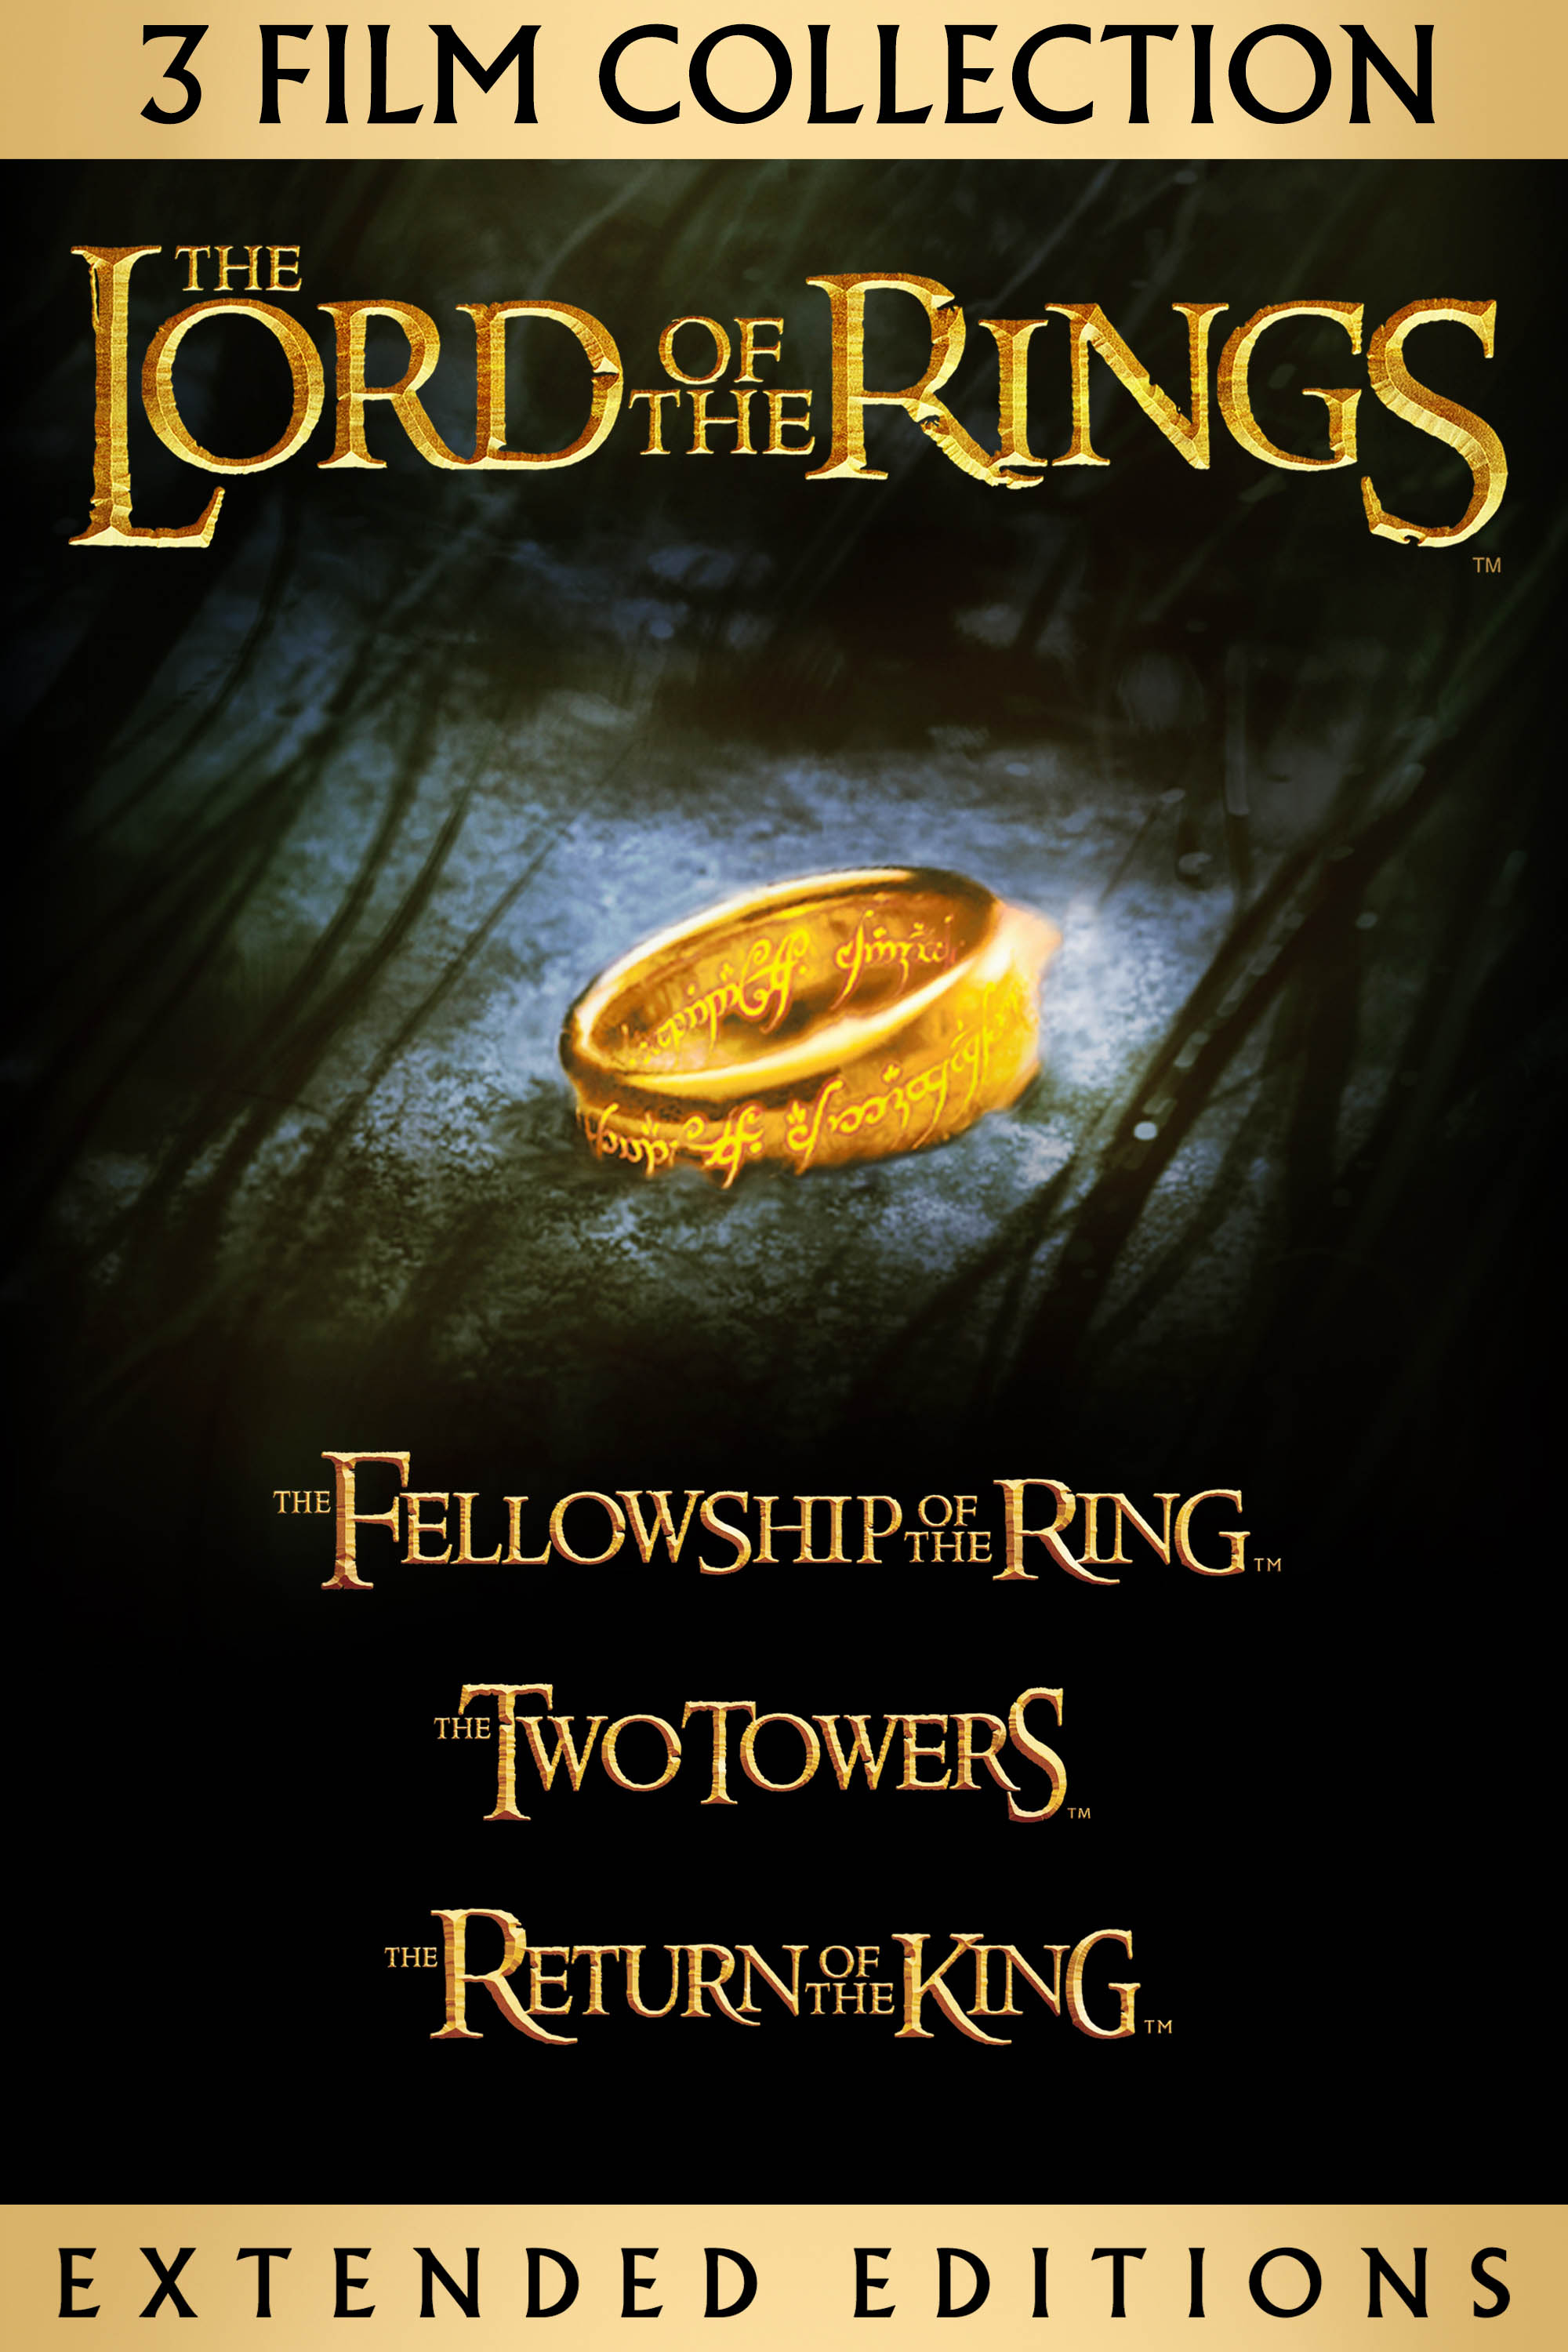 domineren Fictief meisje The Lord of The Rings Motion Picture Trilogy - Extended Edition now  available On Demand!